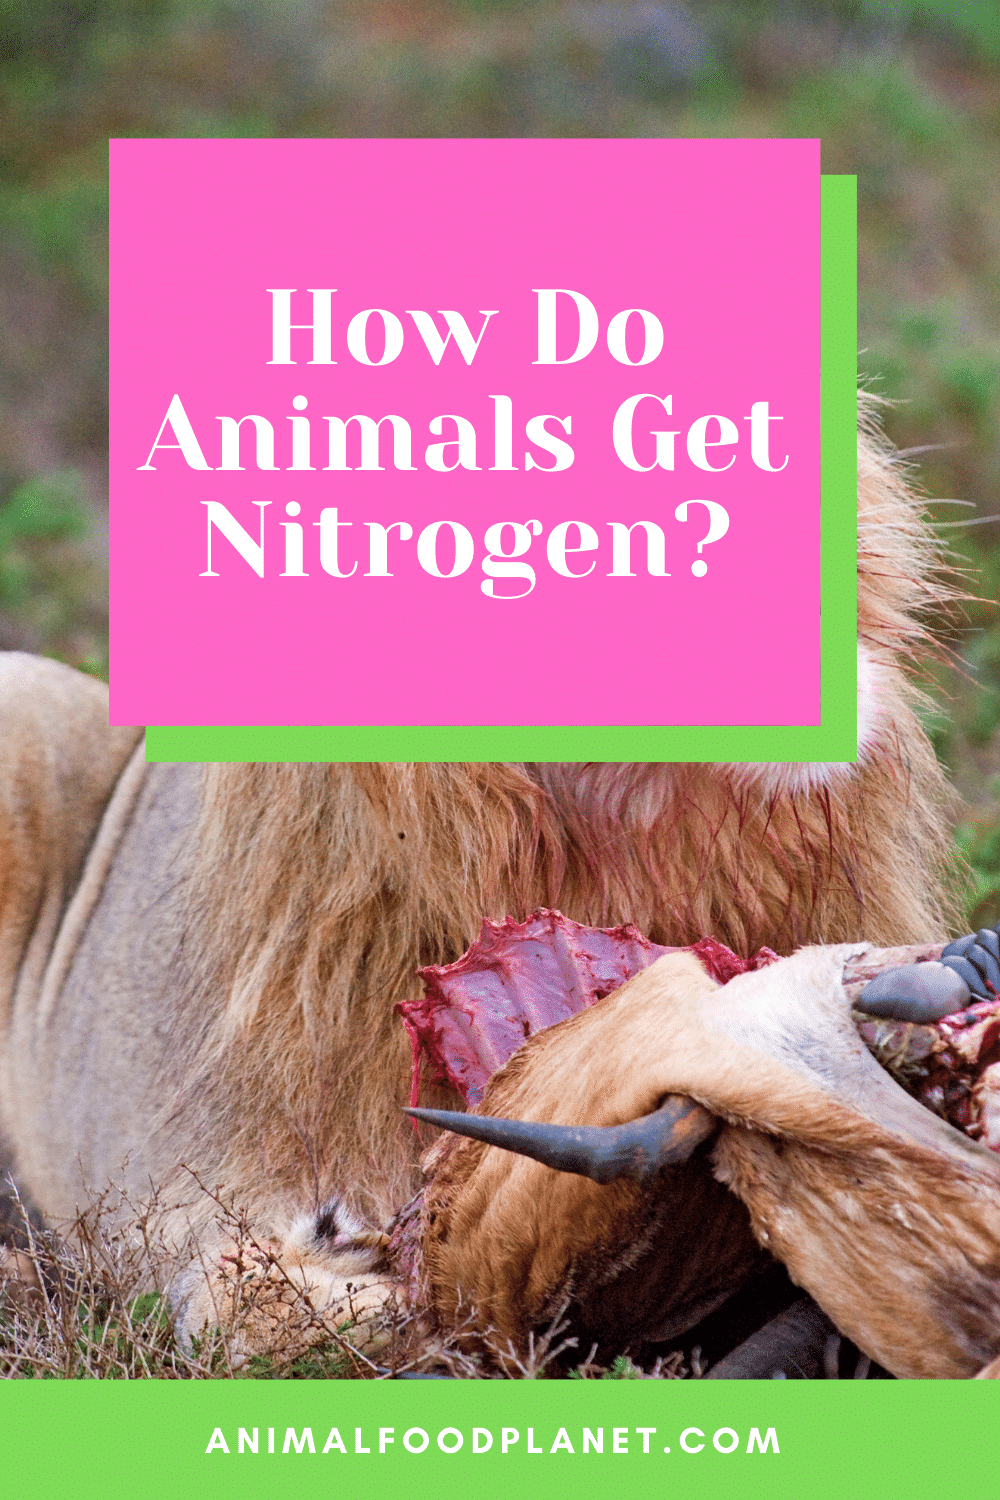 How Do Animals Get Nitrogen? You Will Be Surprised!